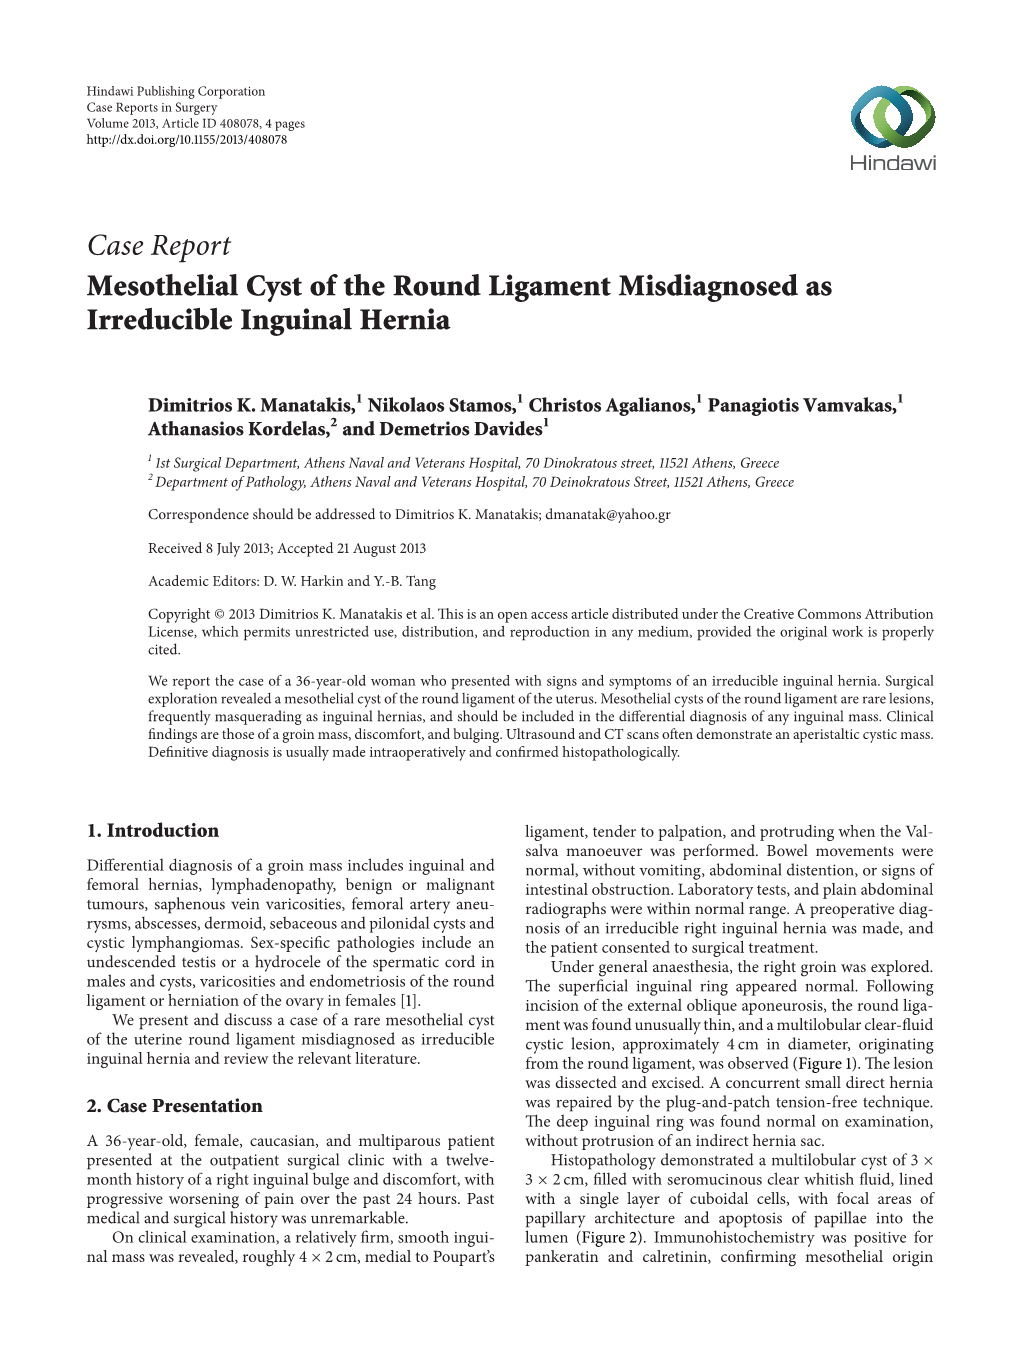 Case Report Mesothelial Cyst of the Round Ligament Misdiagnosed As Irreducible Inguinal Hernia